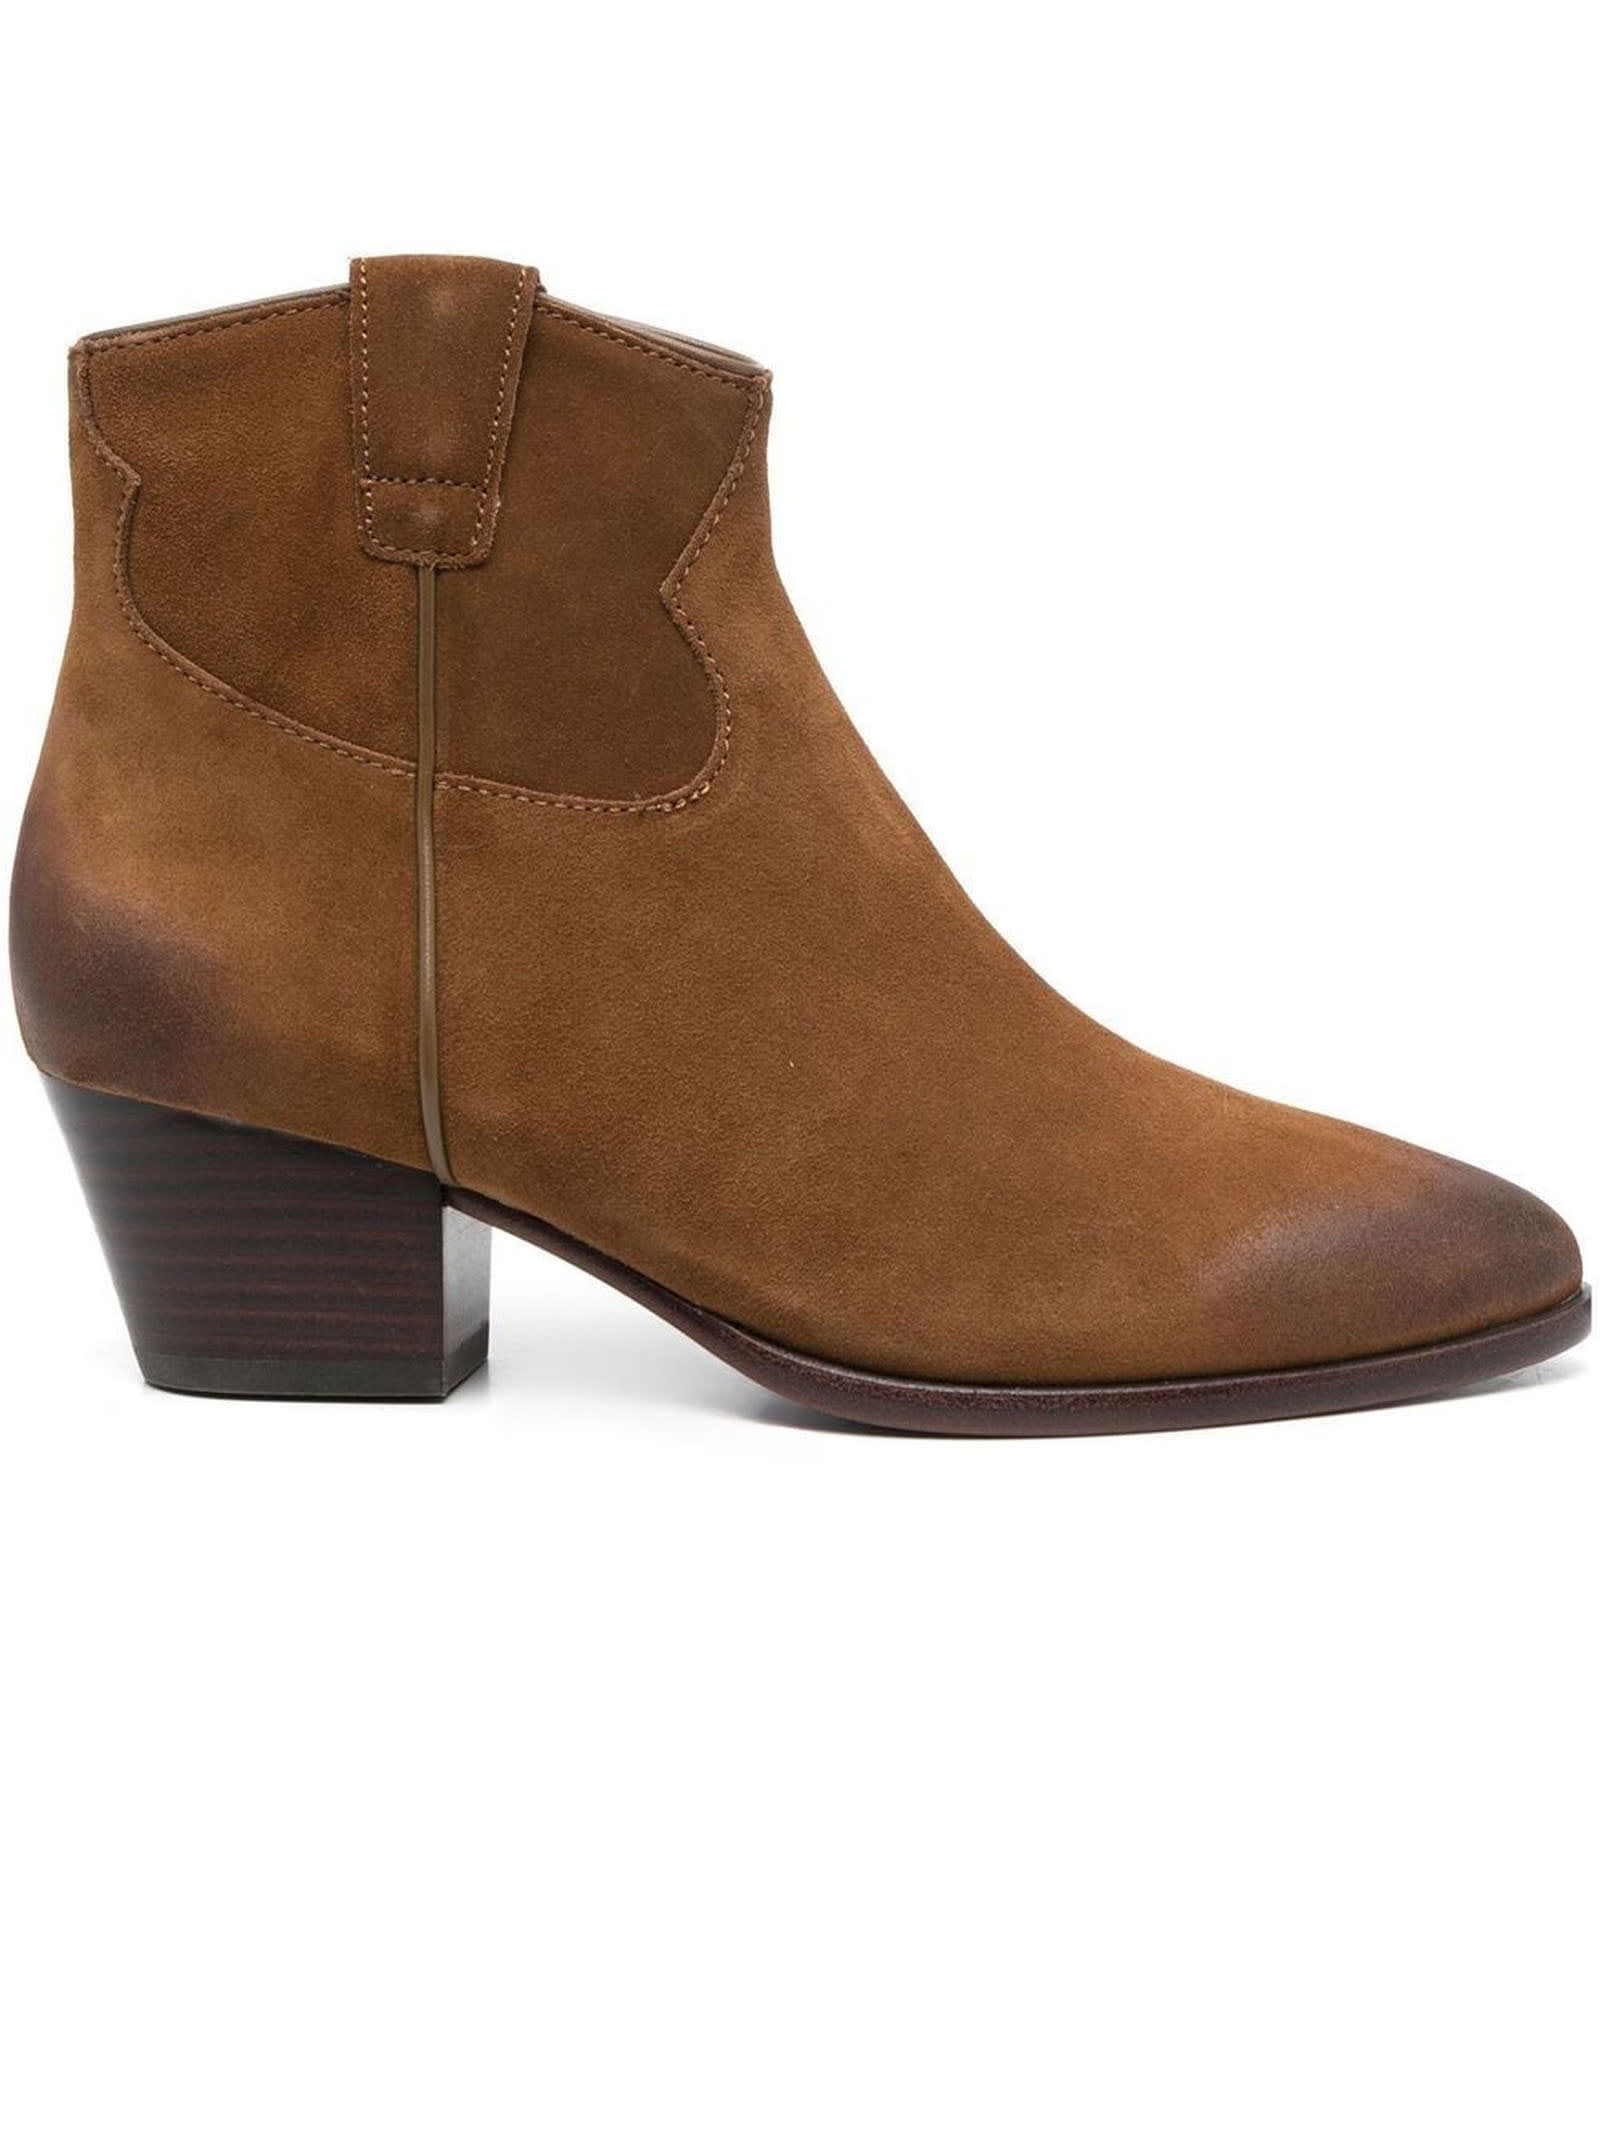 ASH BROWN SUEDE HOUSTON POINTED SUEDE BOOTS